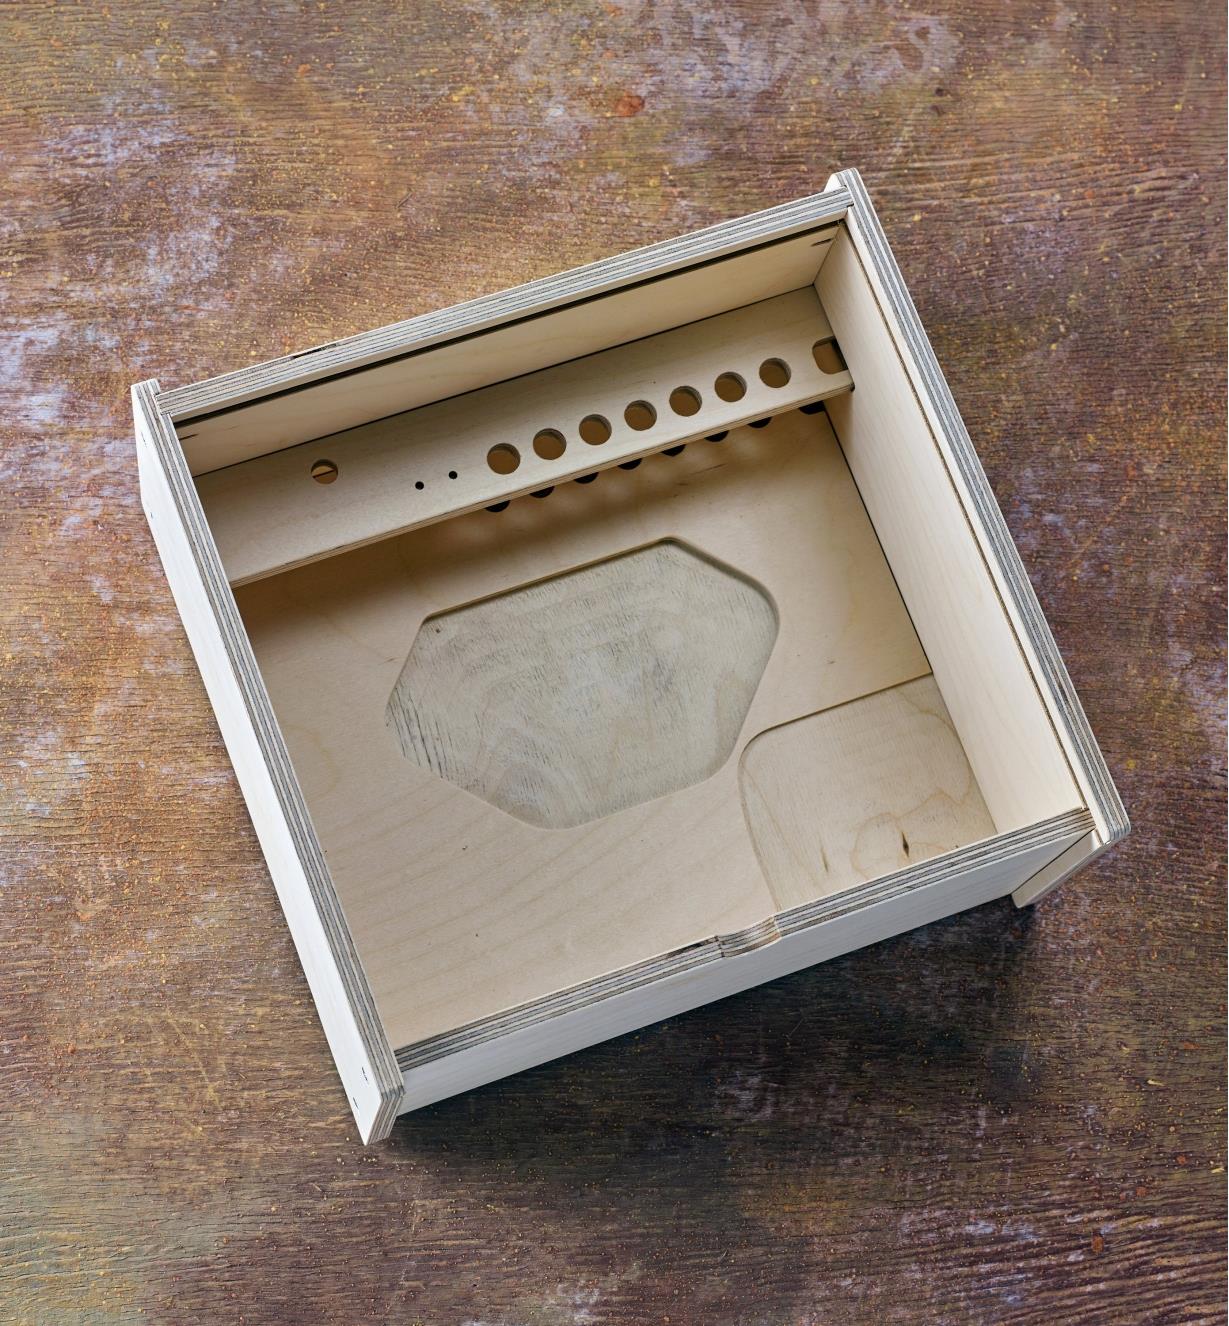 A Veritas router plane box shown fully assembled